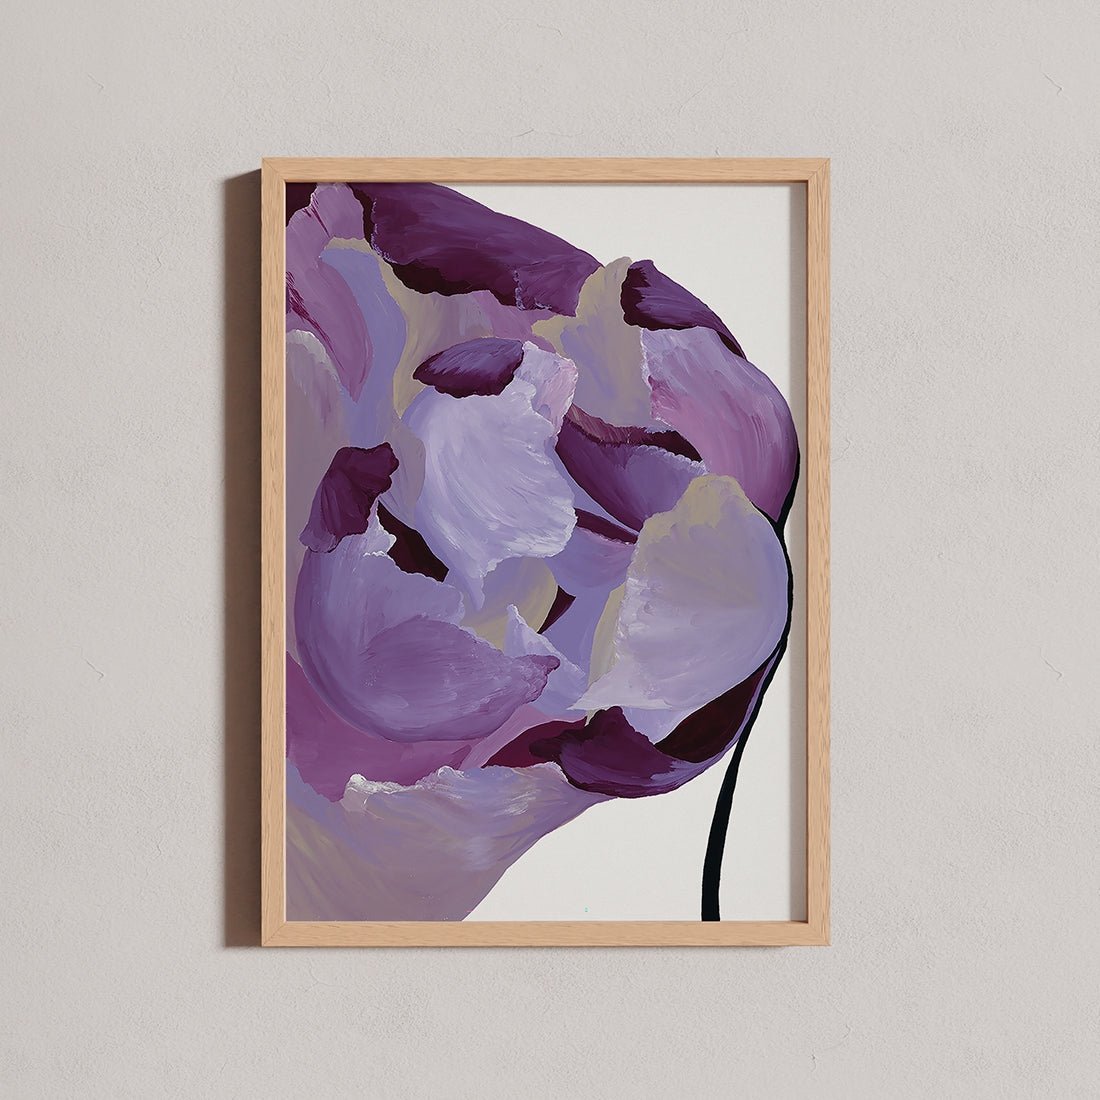 Empire framed print of purple flowers with muted gold accents for eclectic interiors.